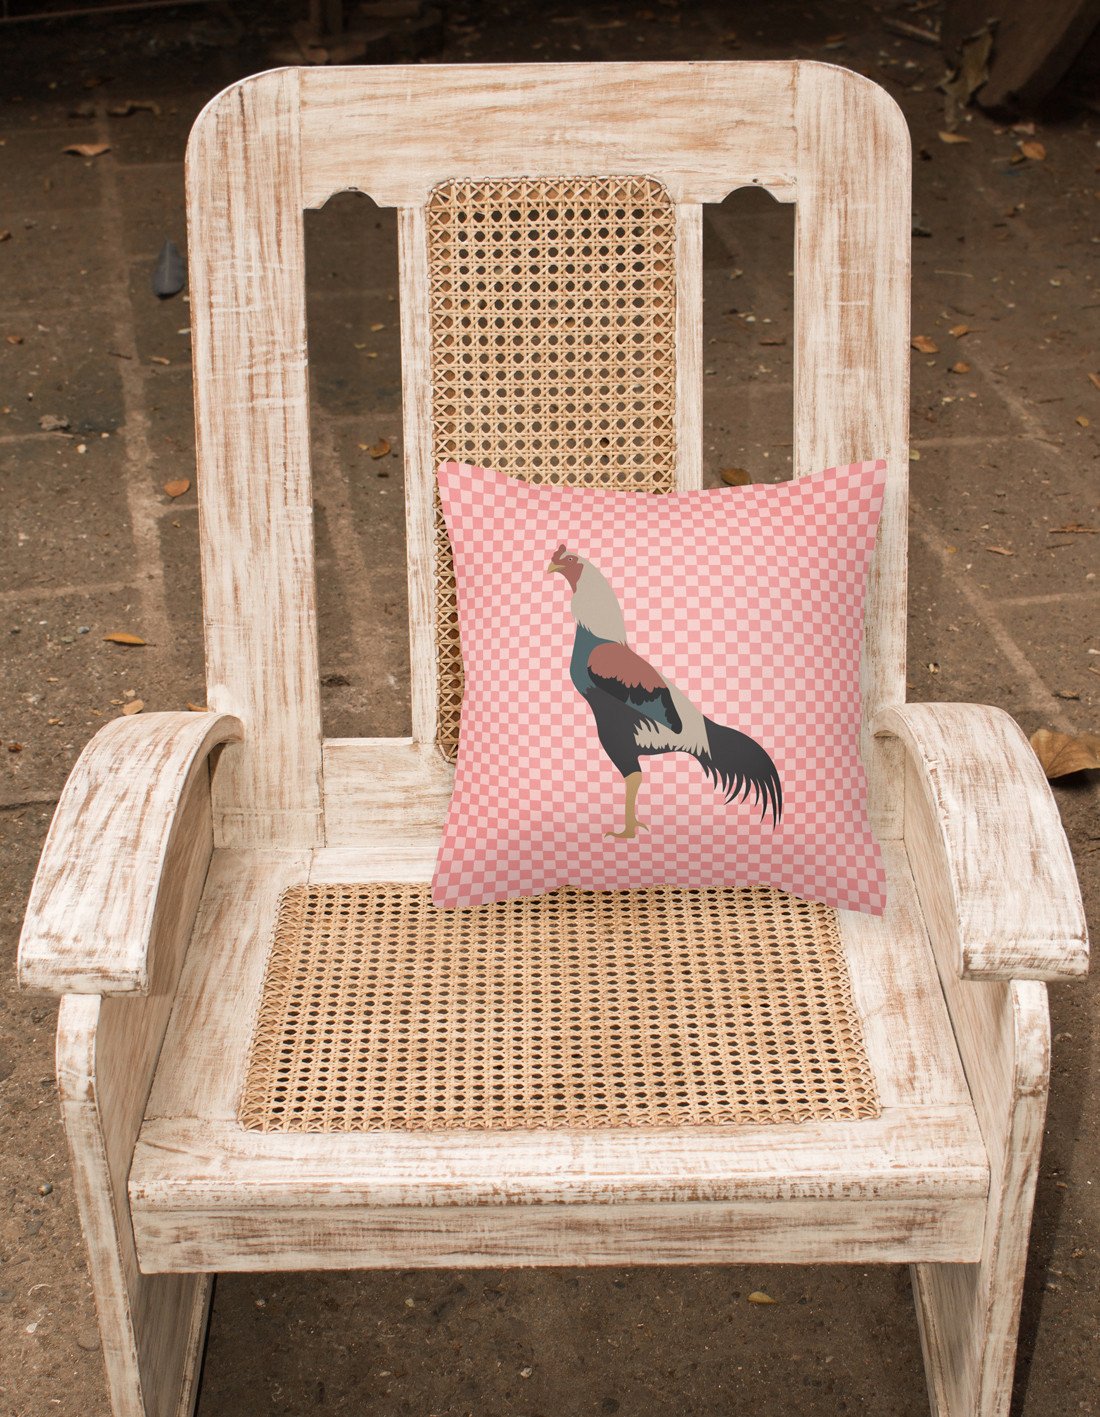 Kulang Chicken Pink Check Fabric Decorative Pillow BB7838PW1818 by Caroline's Treasures